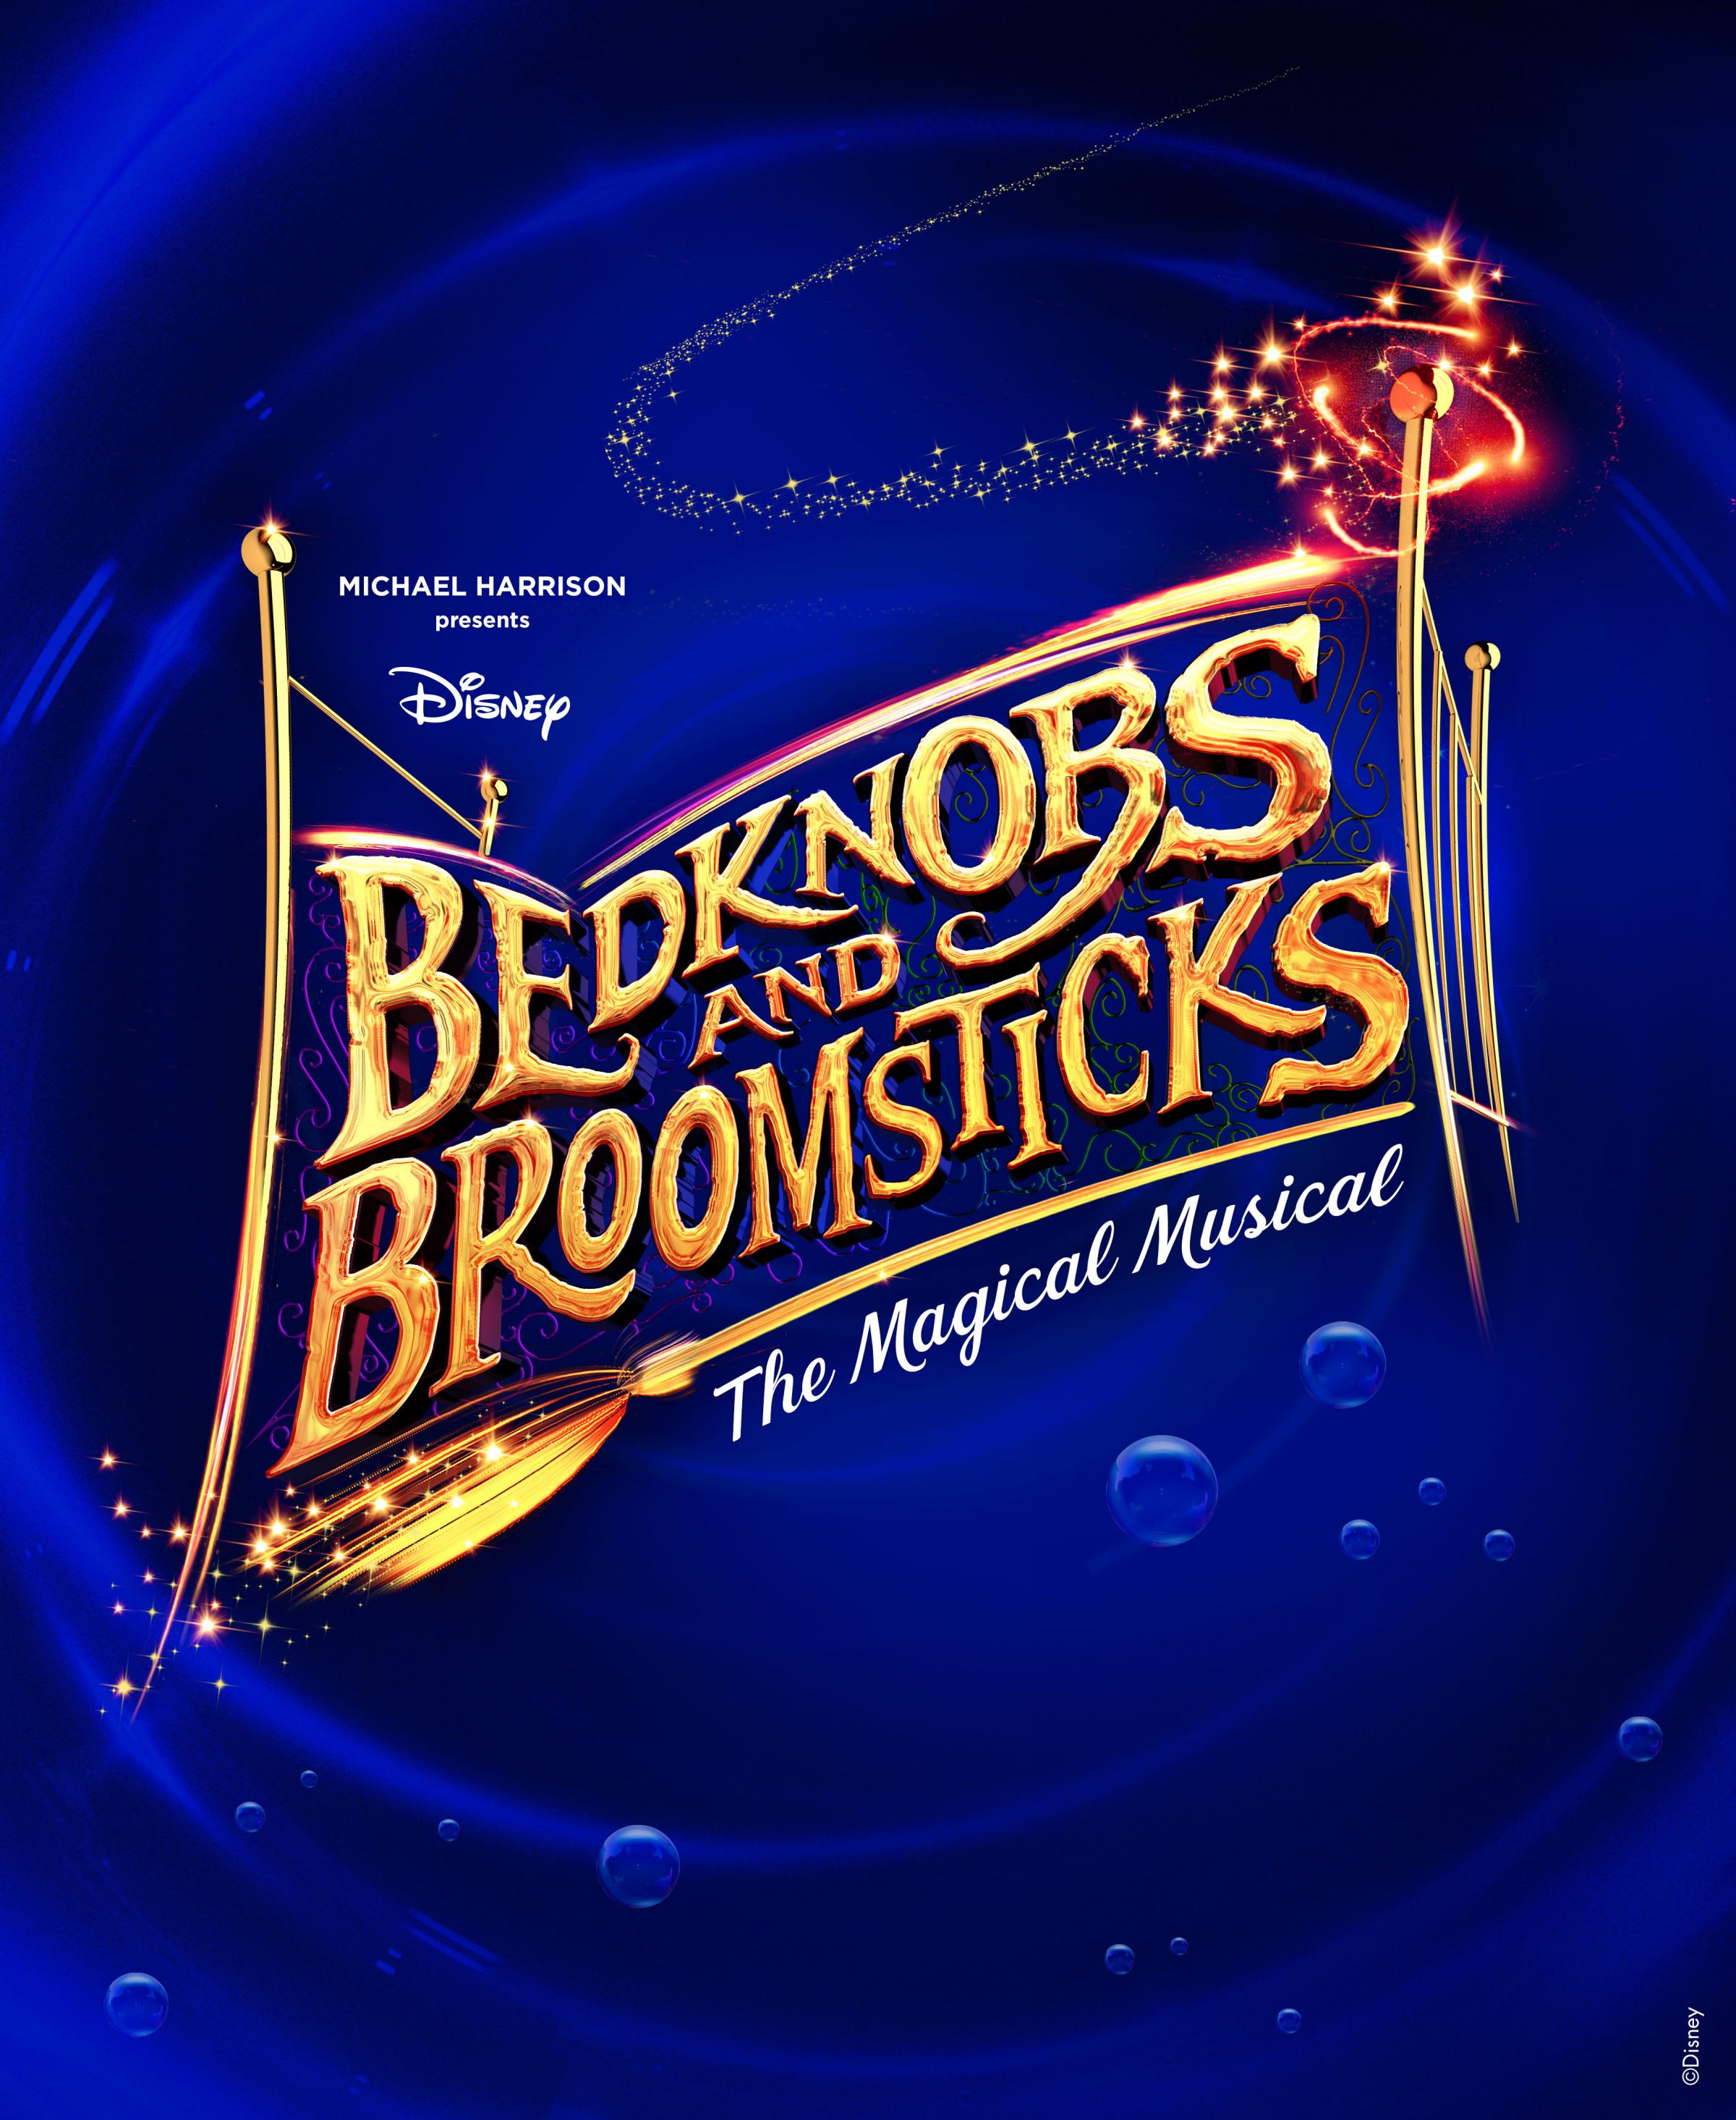 Bedknobs and Broomsticks logo